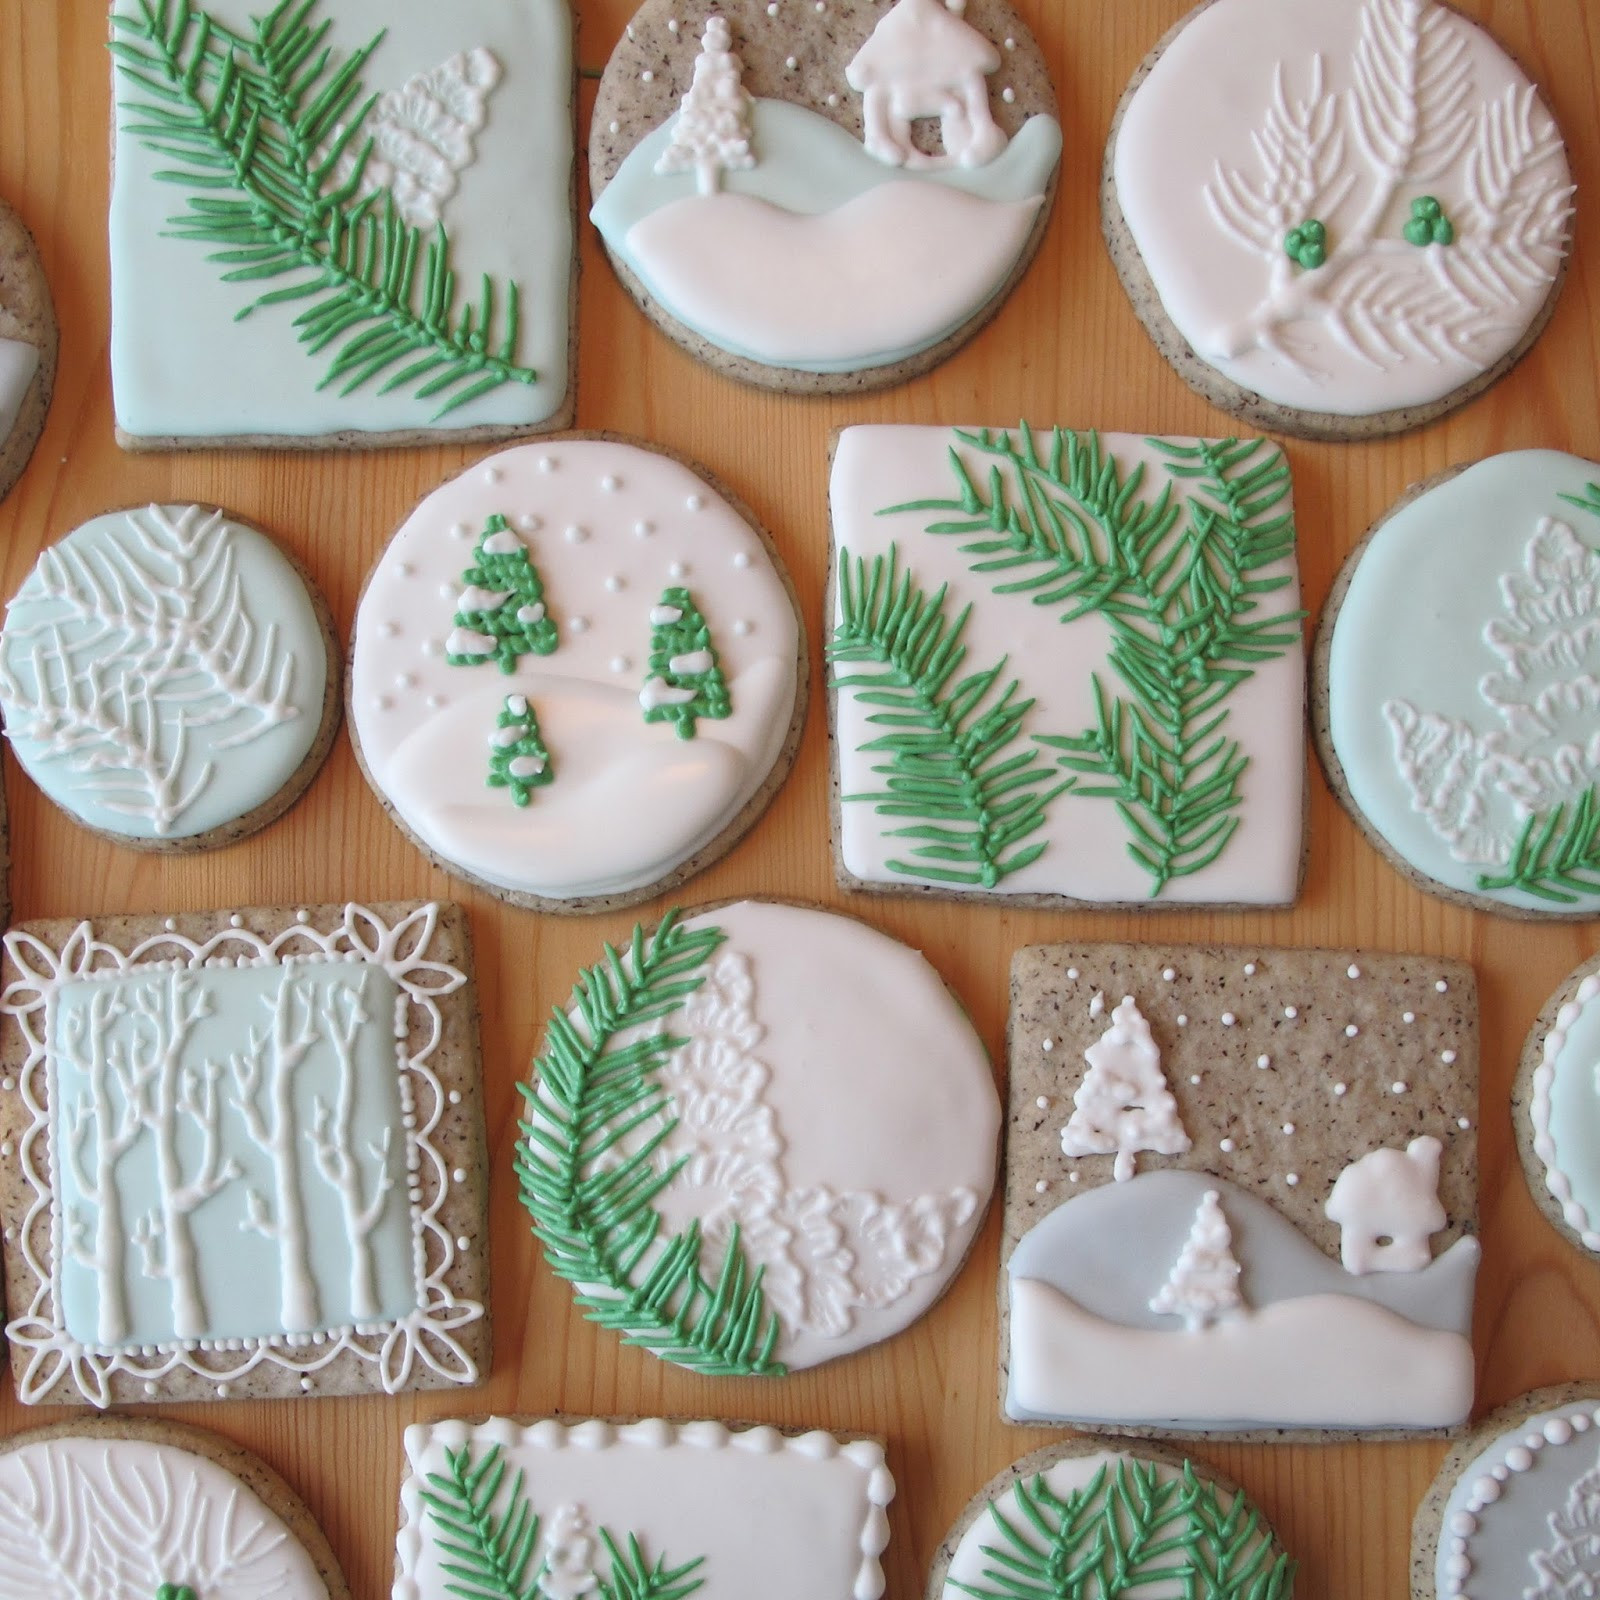 Royal Icing Recipe For Cookies
 Christmas Sugar Cookies With Royal Icing – Happy Holidays